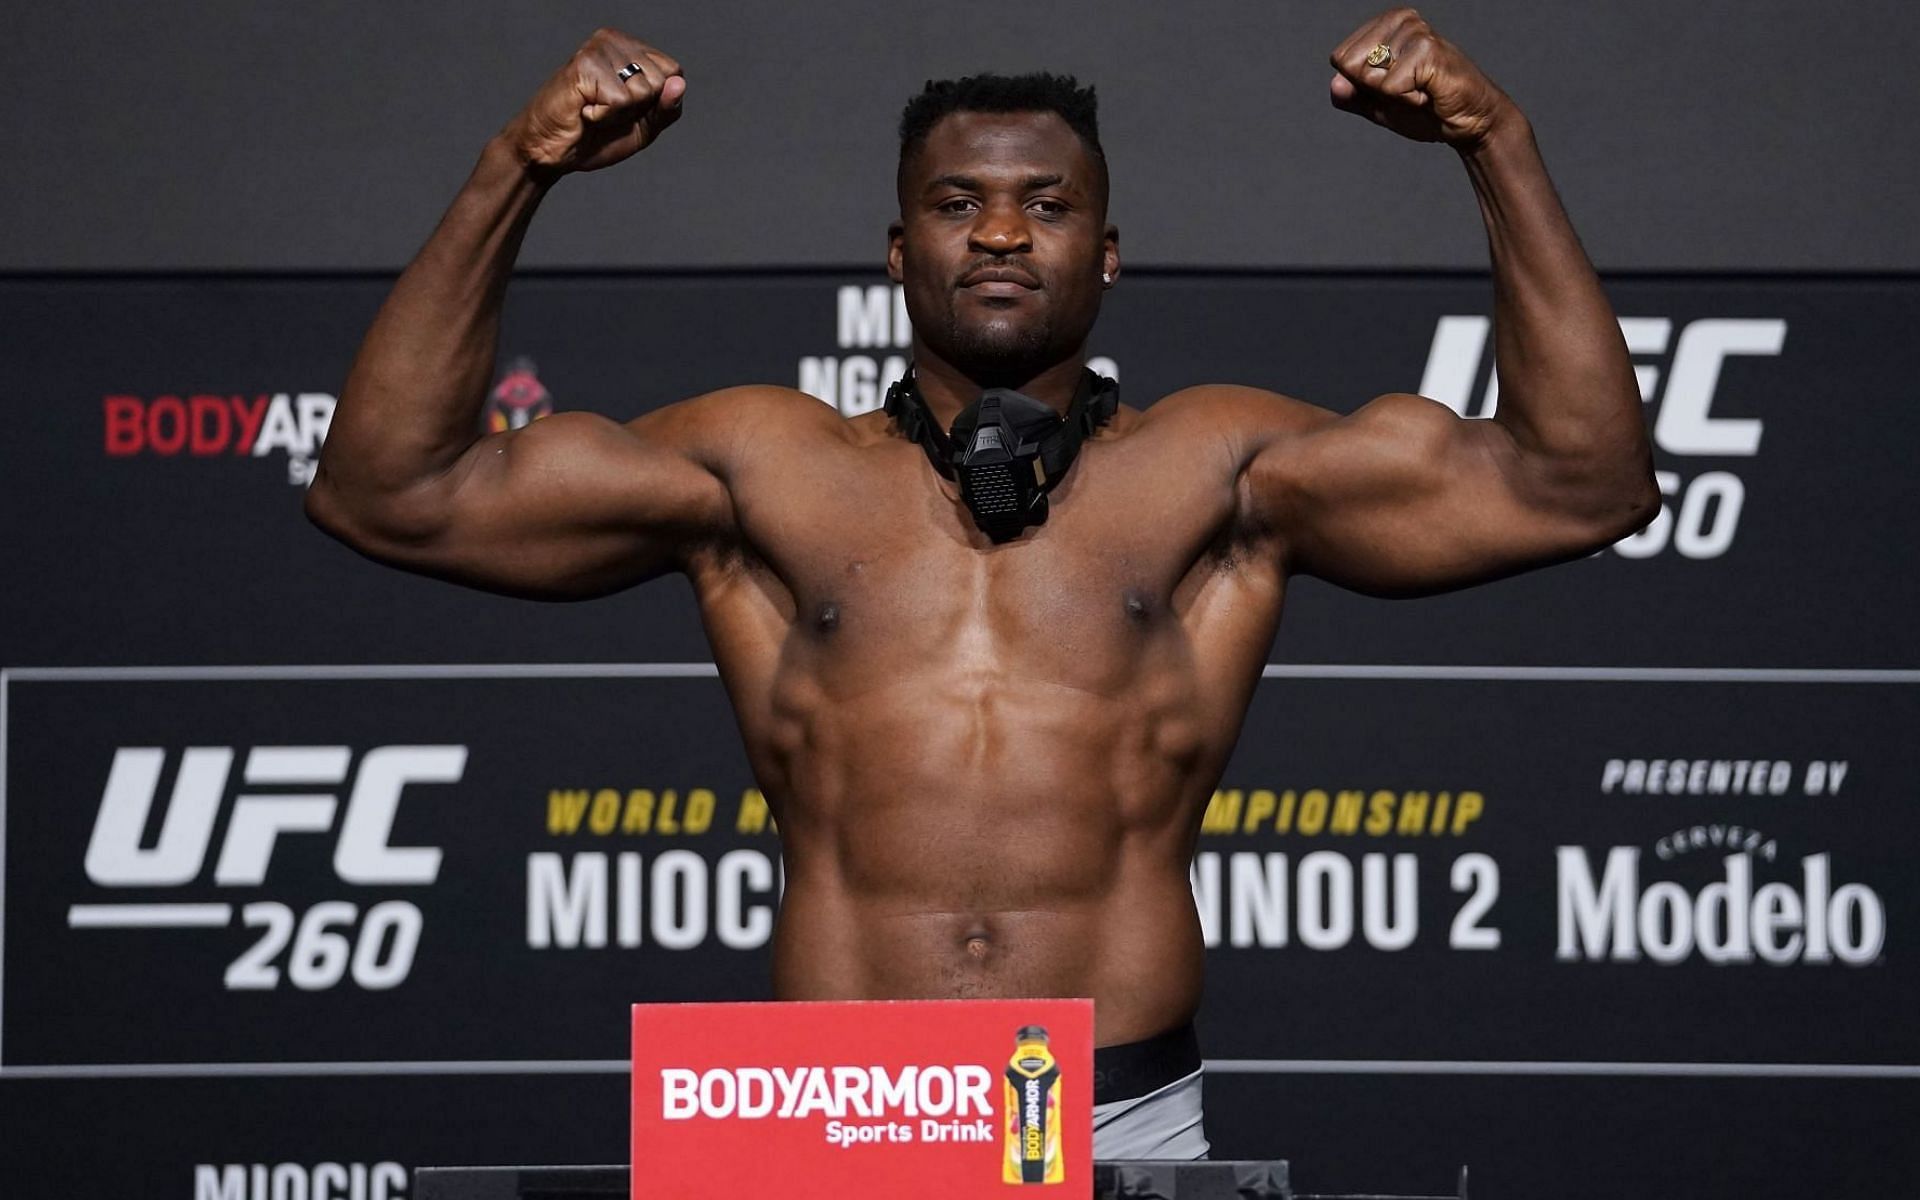 Francis Ngannou is the reigning UFC heavyweight champion